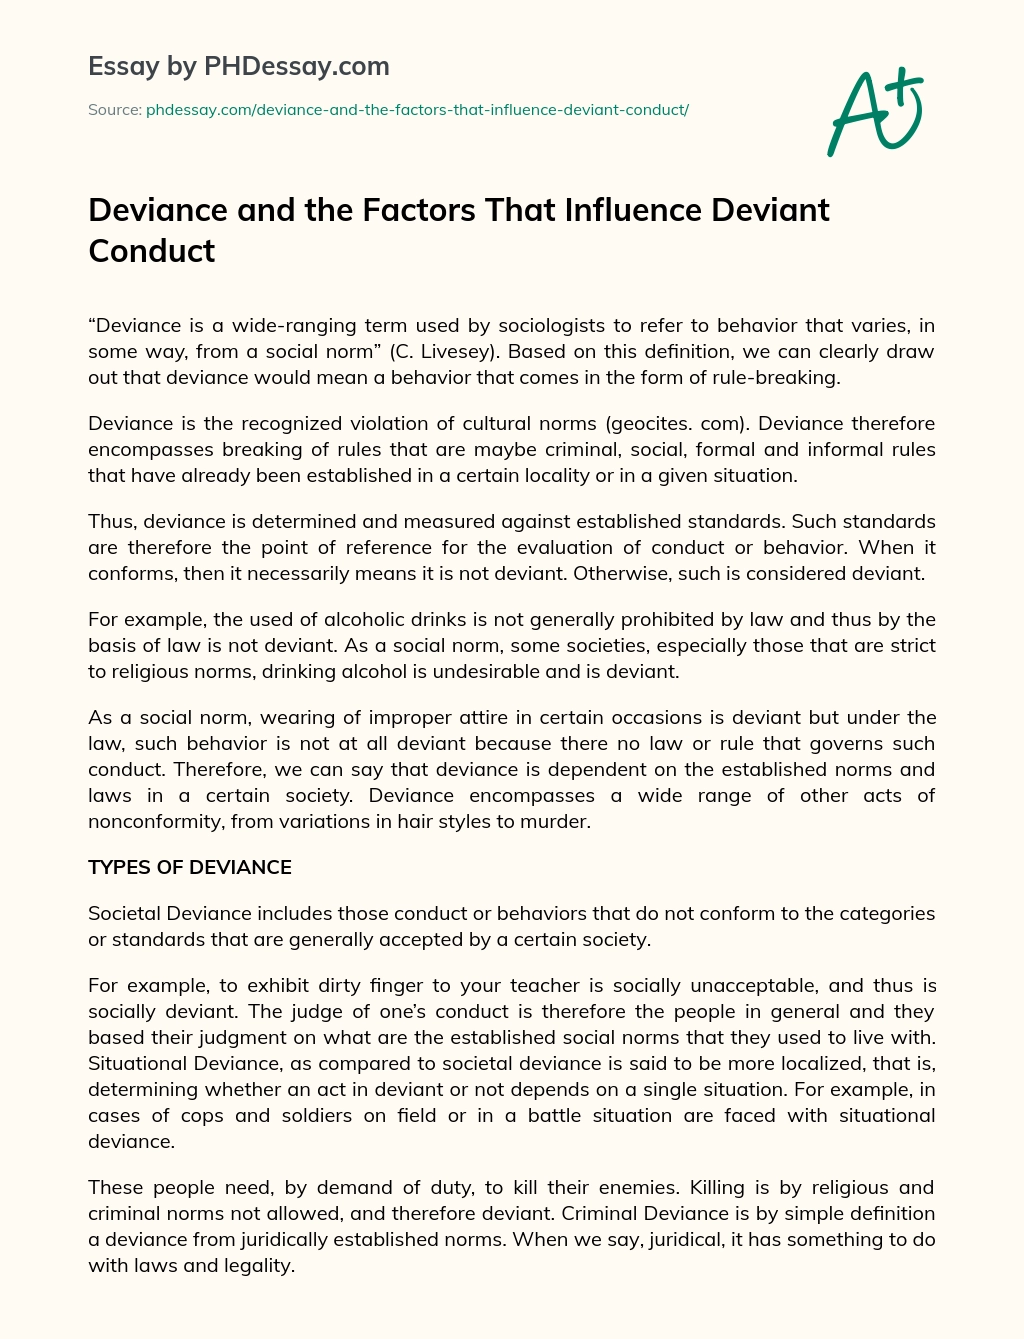 Deviance and the Factors That Influence Deviant Conduct essay